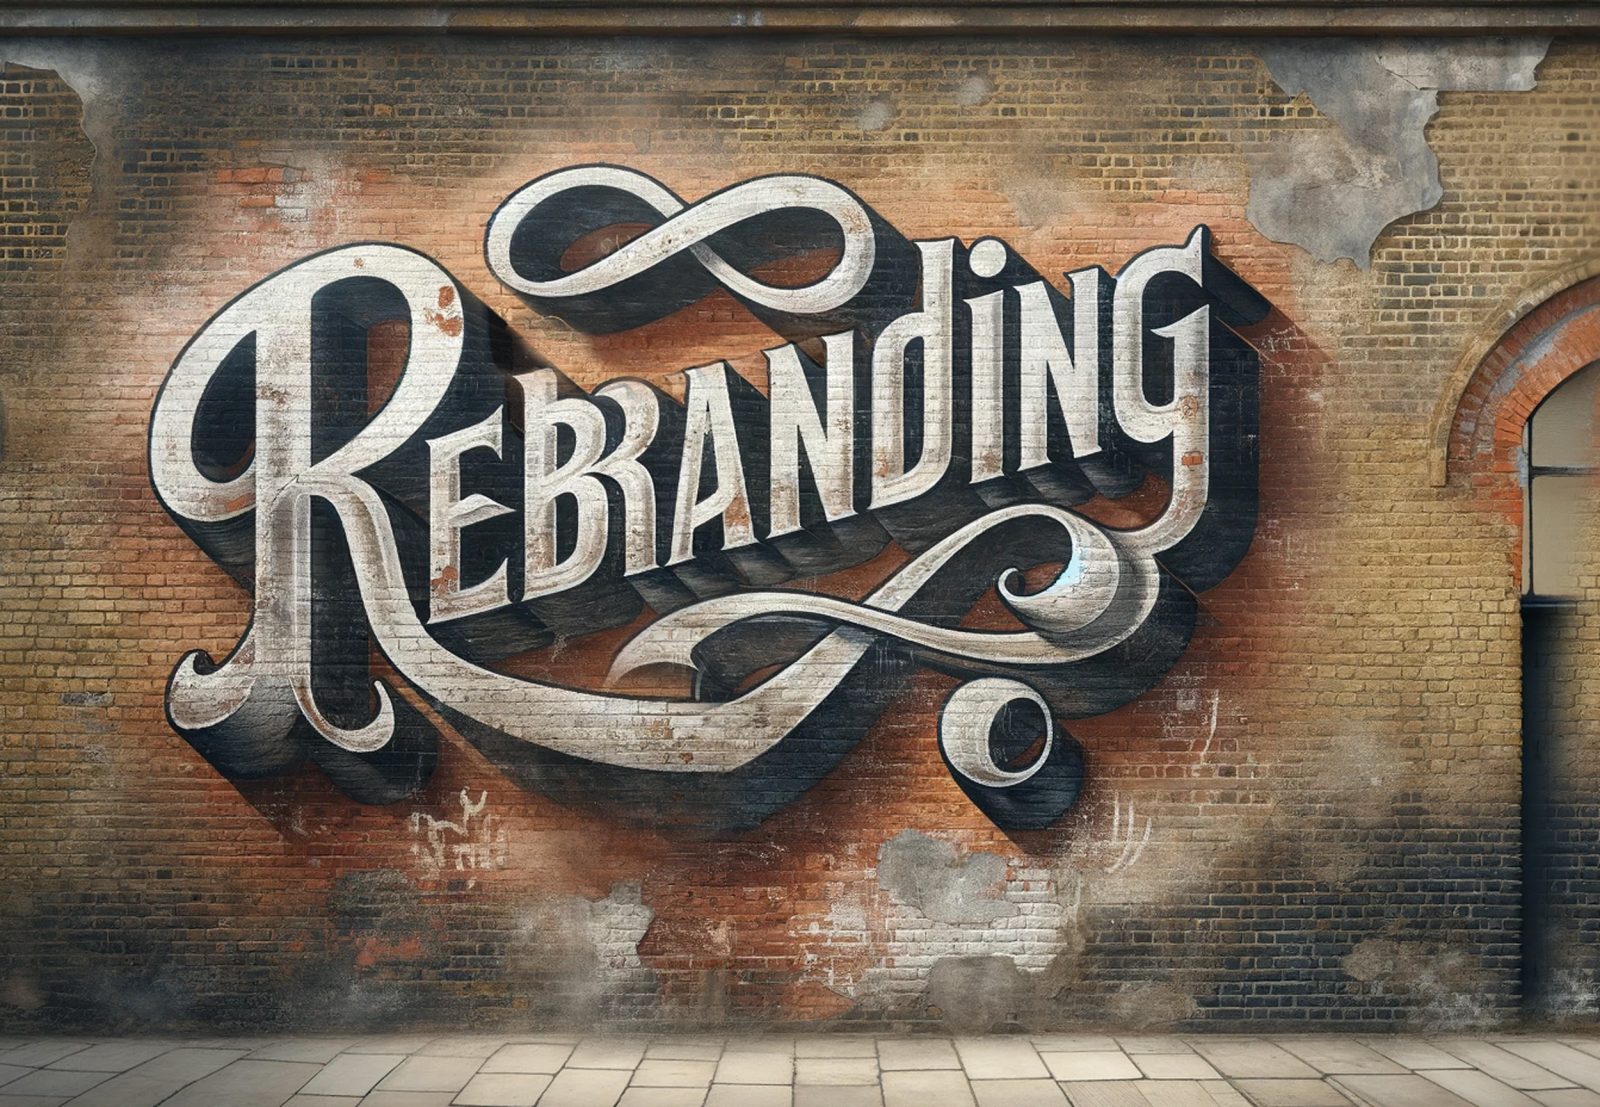 The Ultimate Guide to Rebranding Mural by David Brier